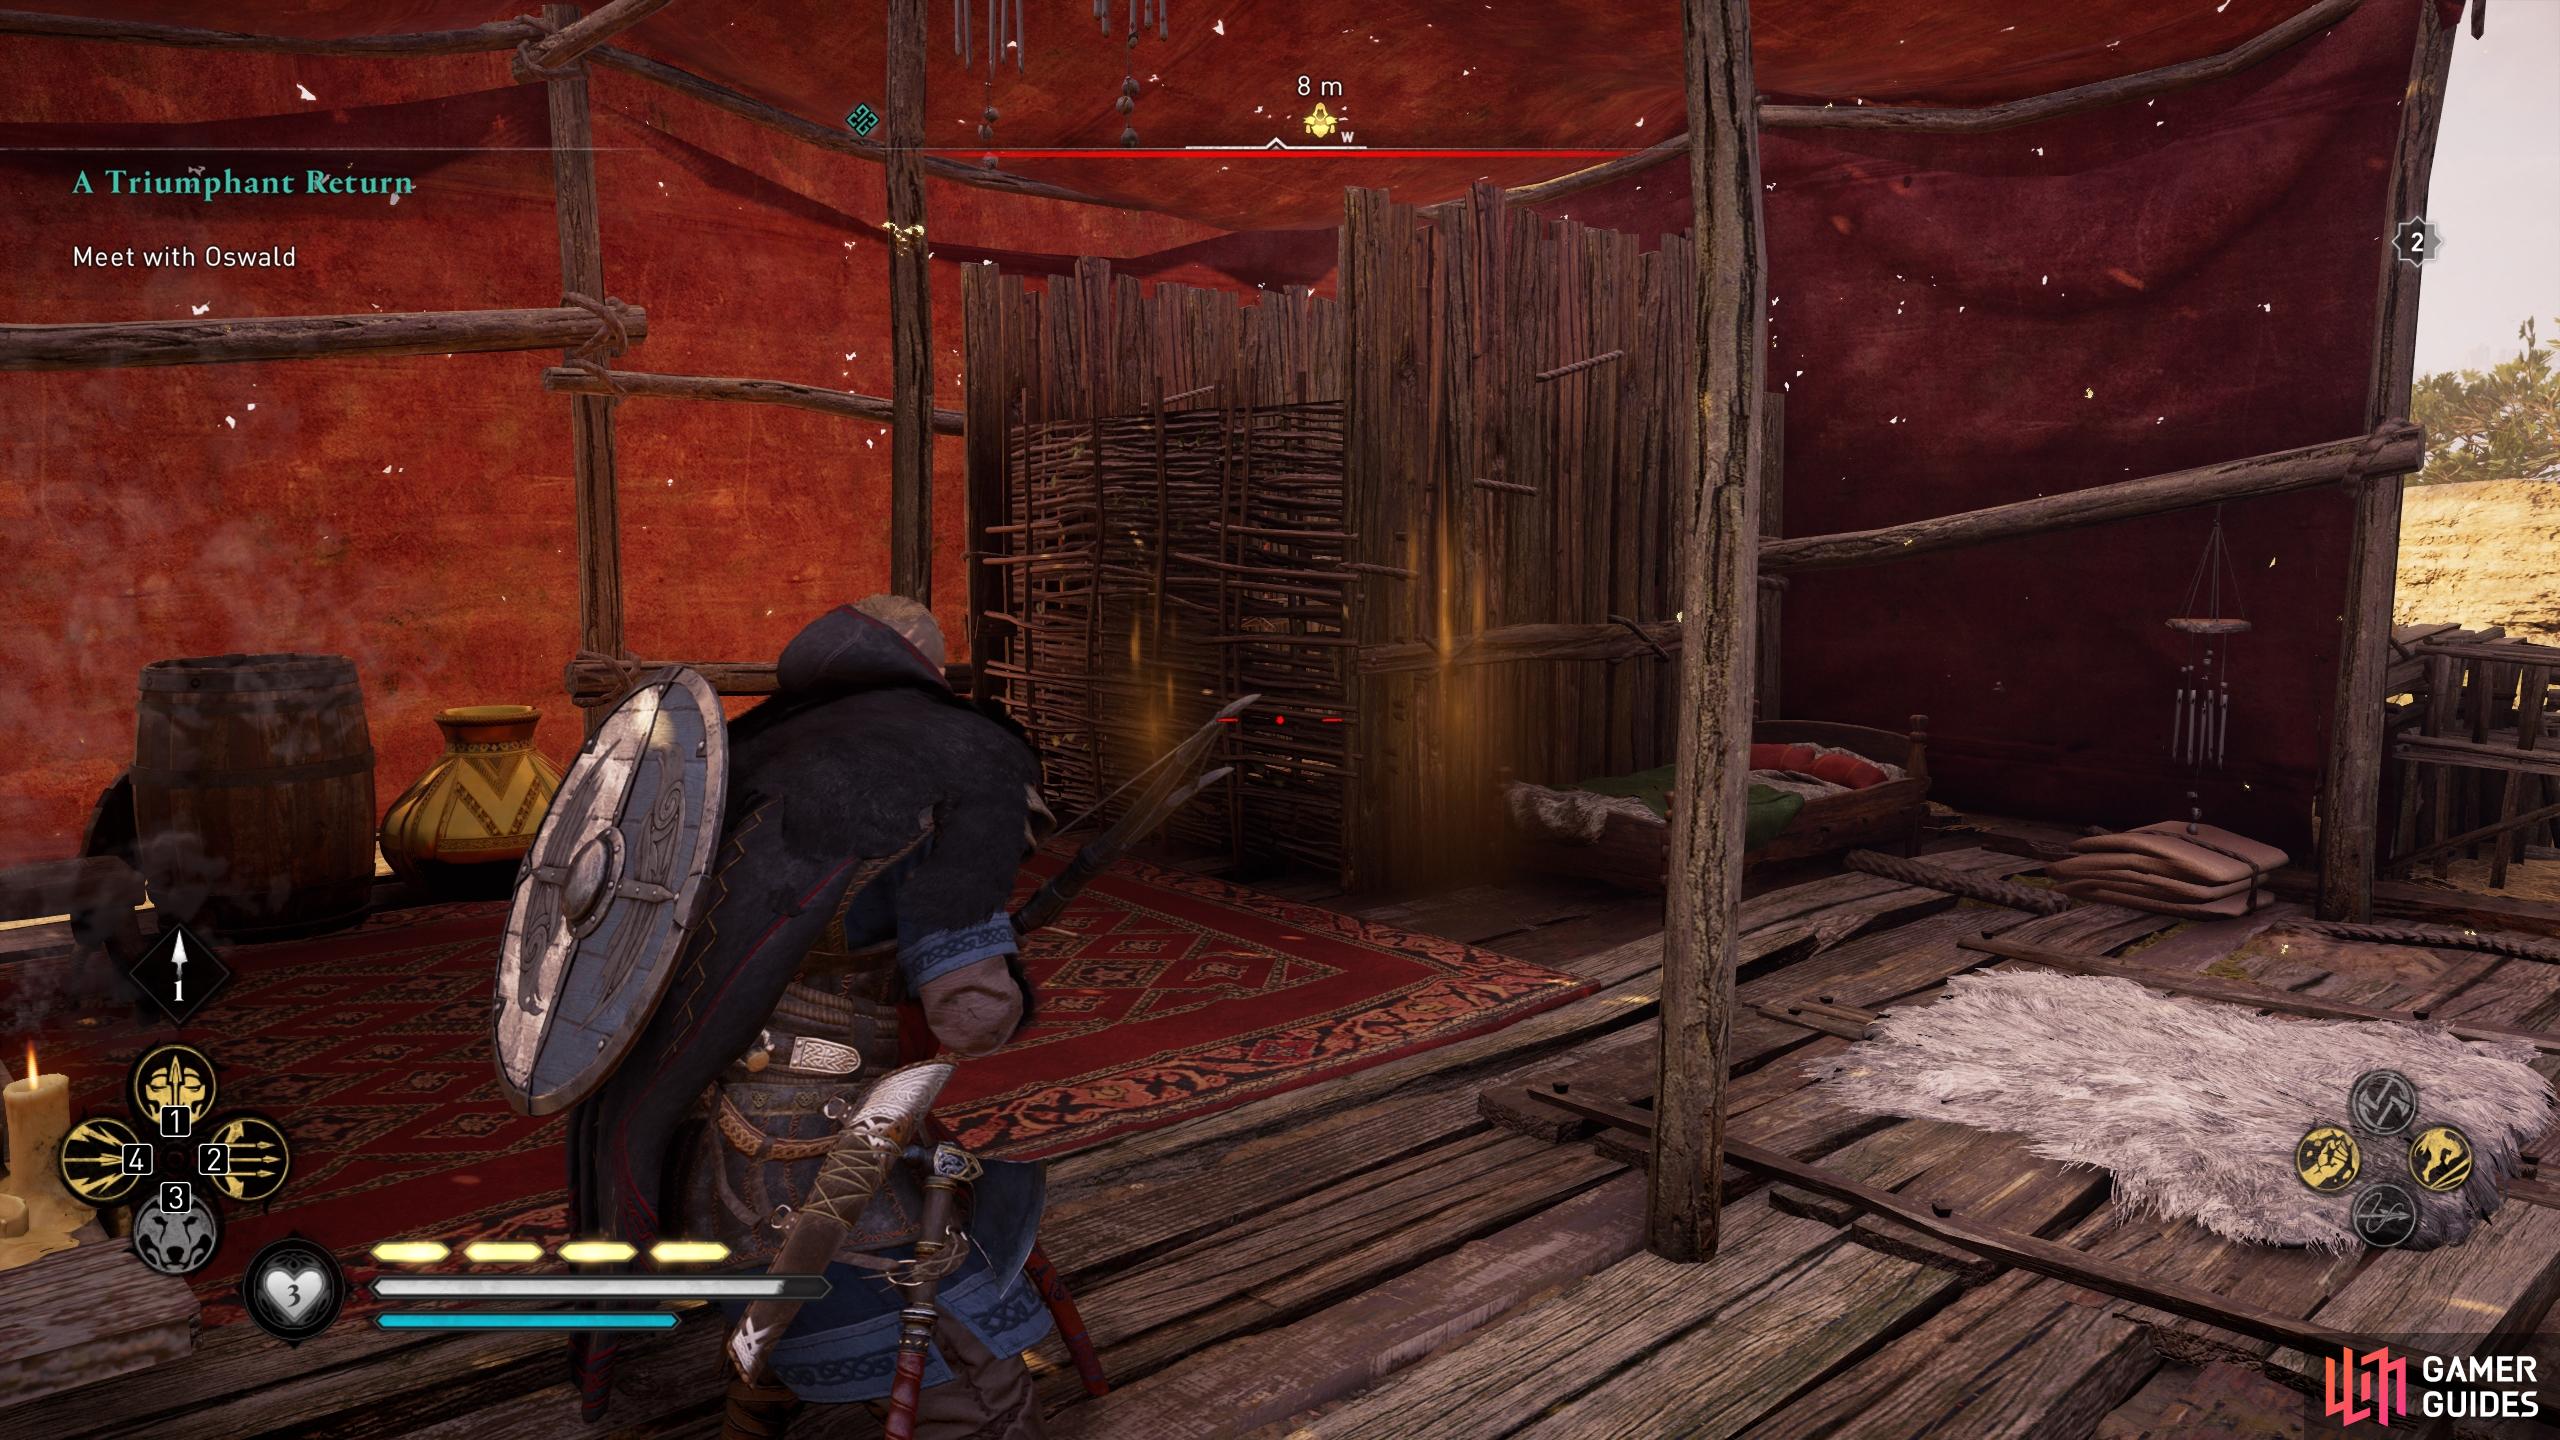 Loot the treasure chest at the back of the camp to find the Magister's Cloak.